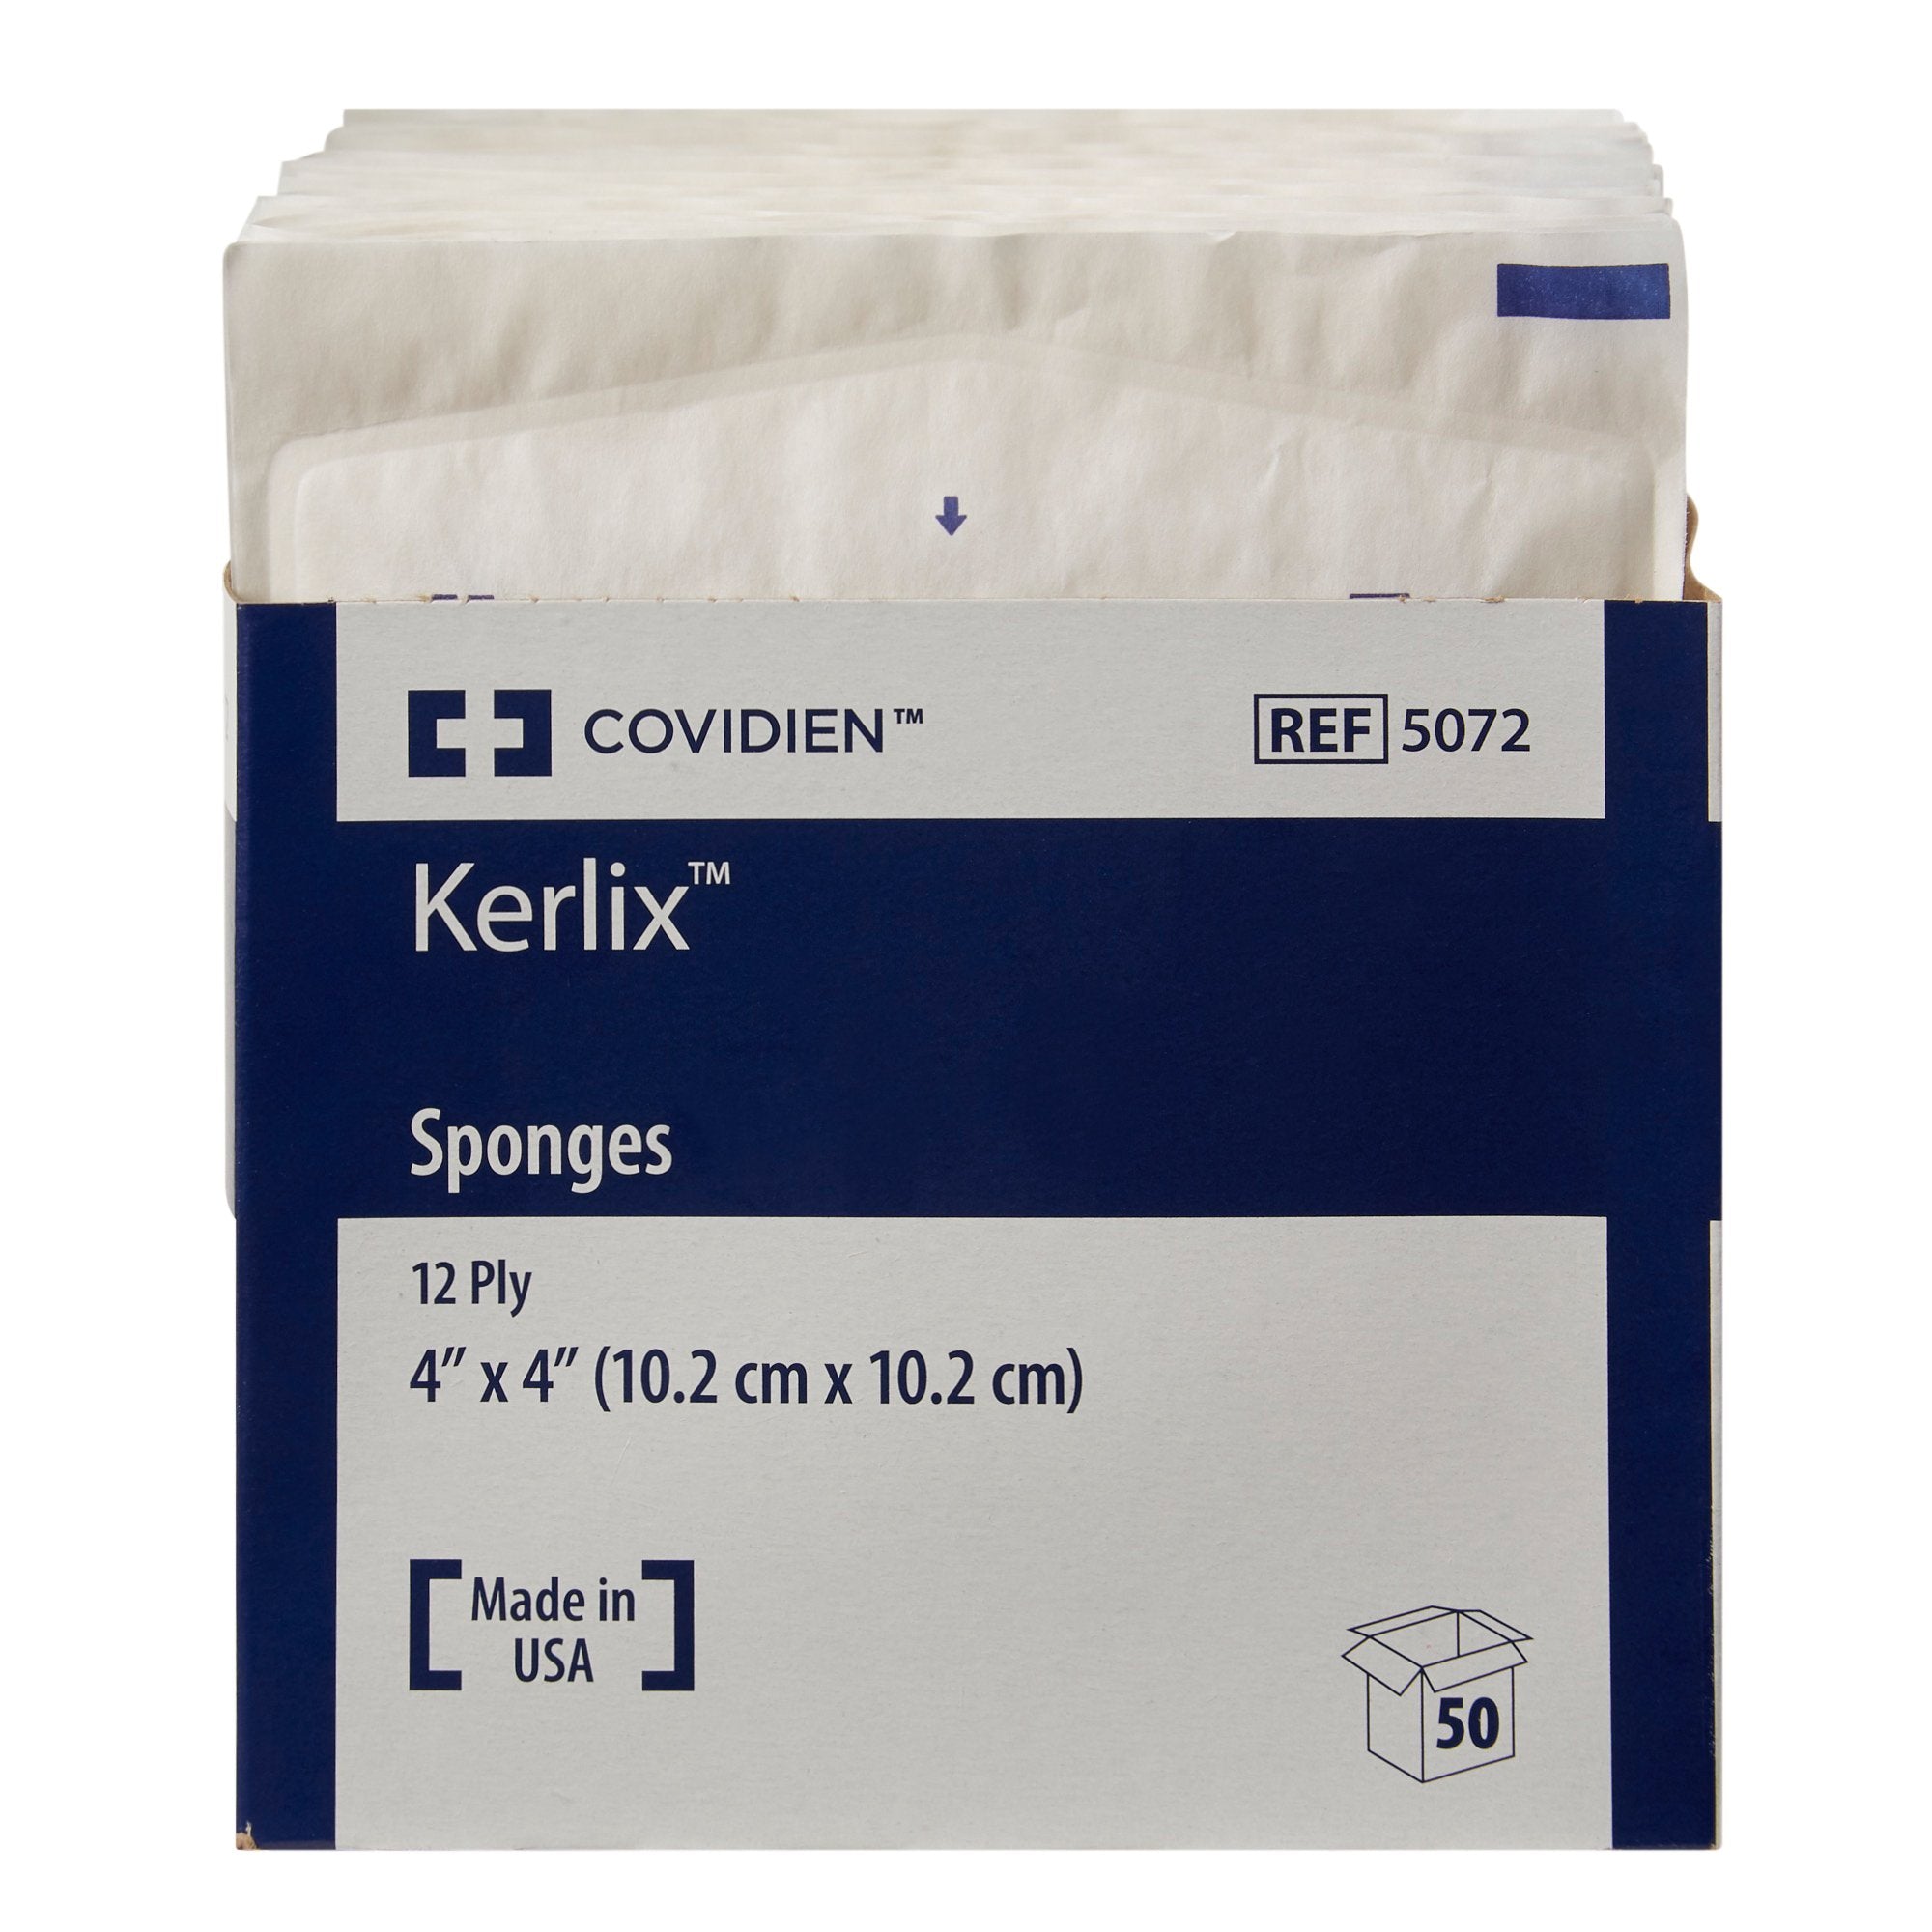 USP Type VII Fluff Dressing Kerlix Fluff Dried Woven Gauze 12-Ply 4 X 4 Inch Square Sterile